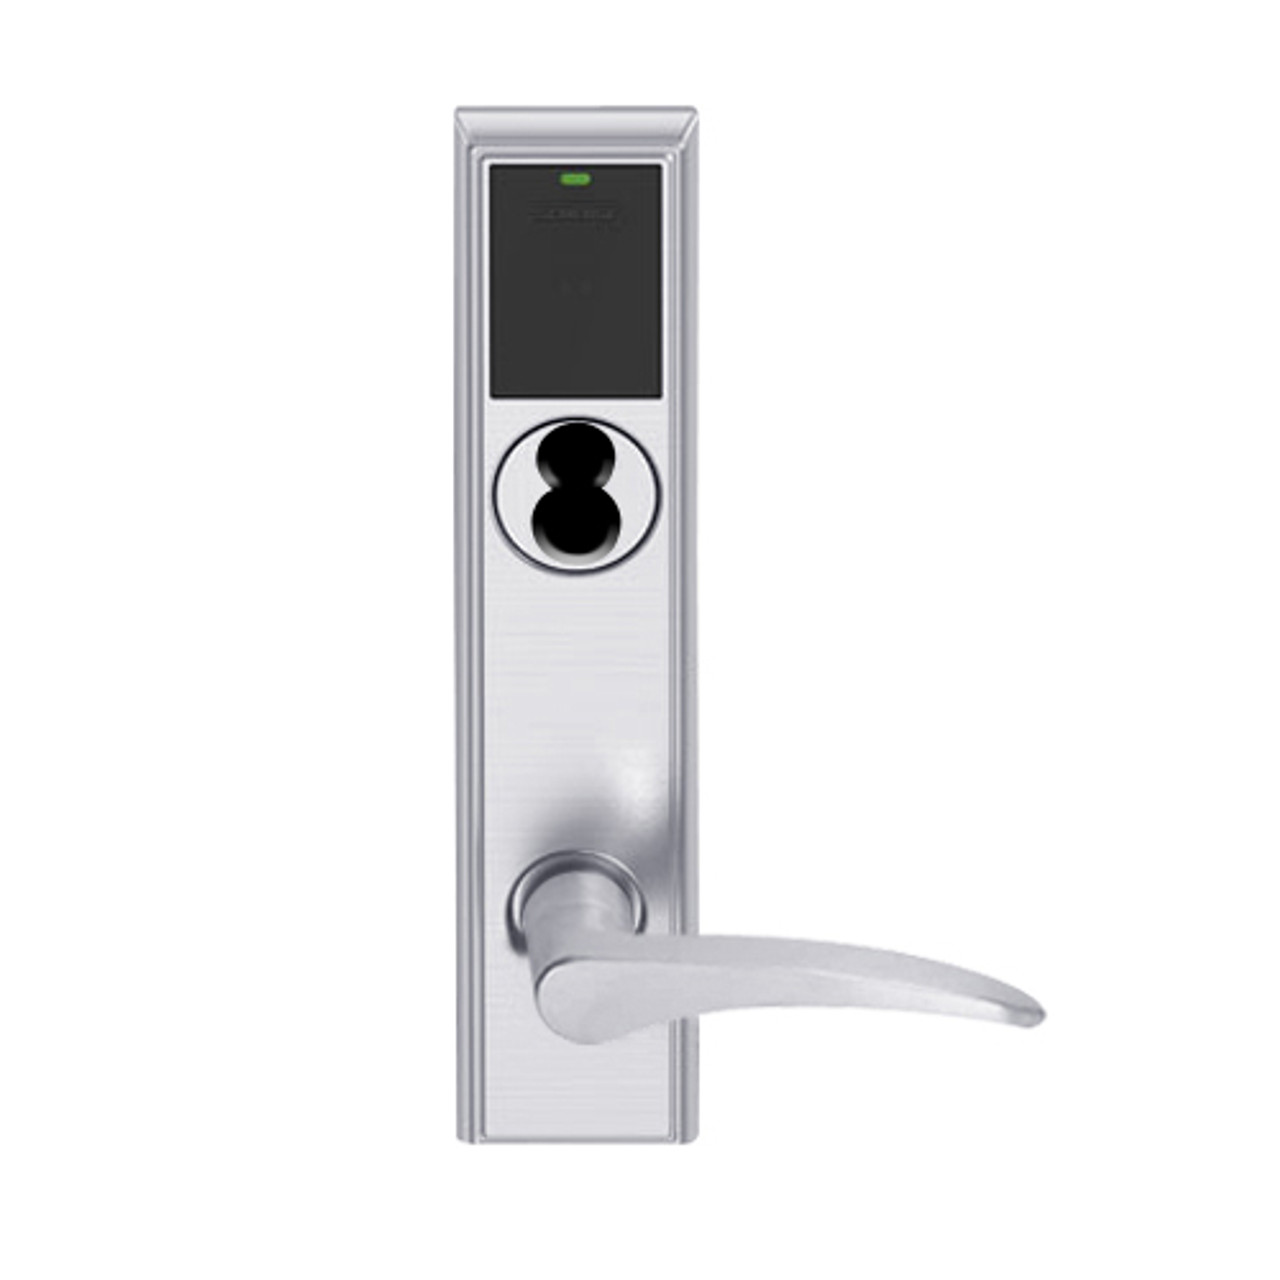 LEMB-ADD-BD-12-626AM-RH Schlage Privacy/Office Wireless Addison Mortise Lock with Push Button, LED and 12 Lever Prepped for SFIC in Satin Chrome Antimicrobial